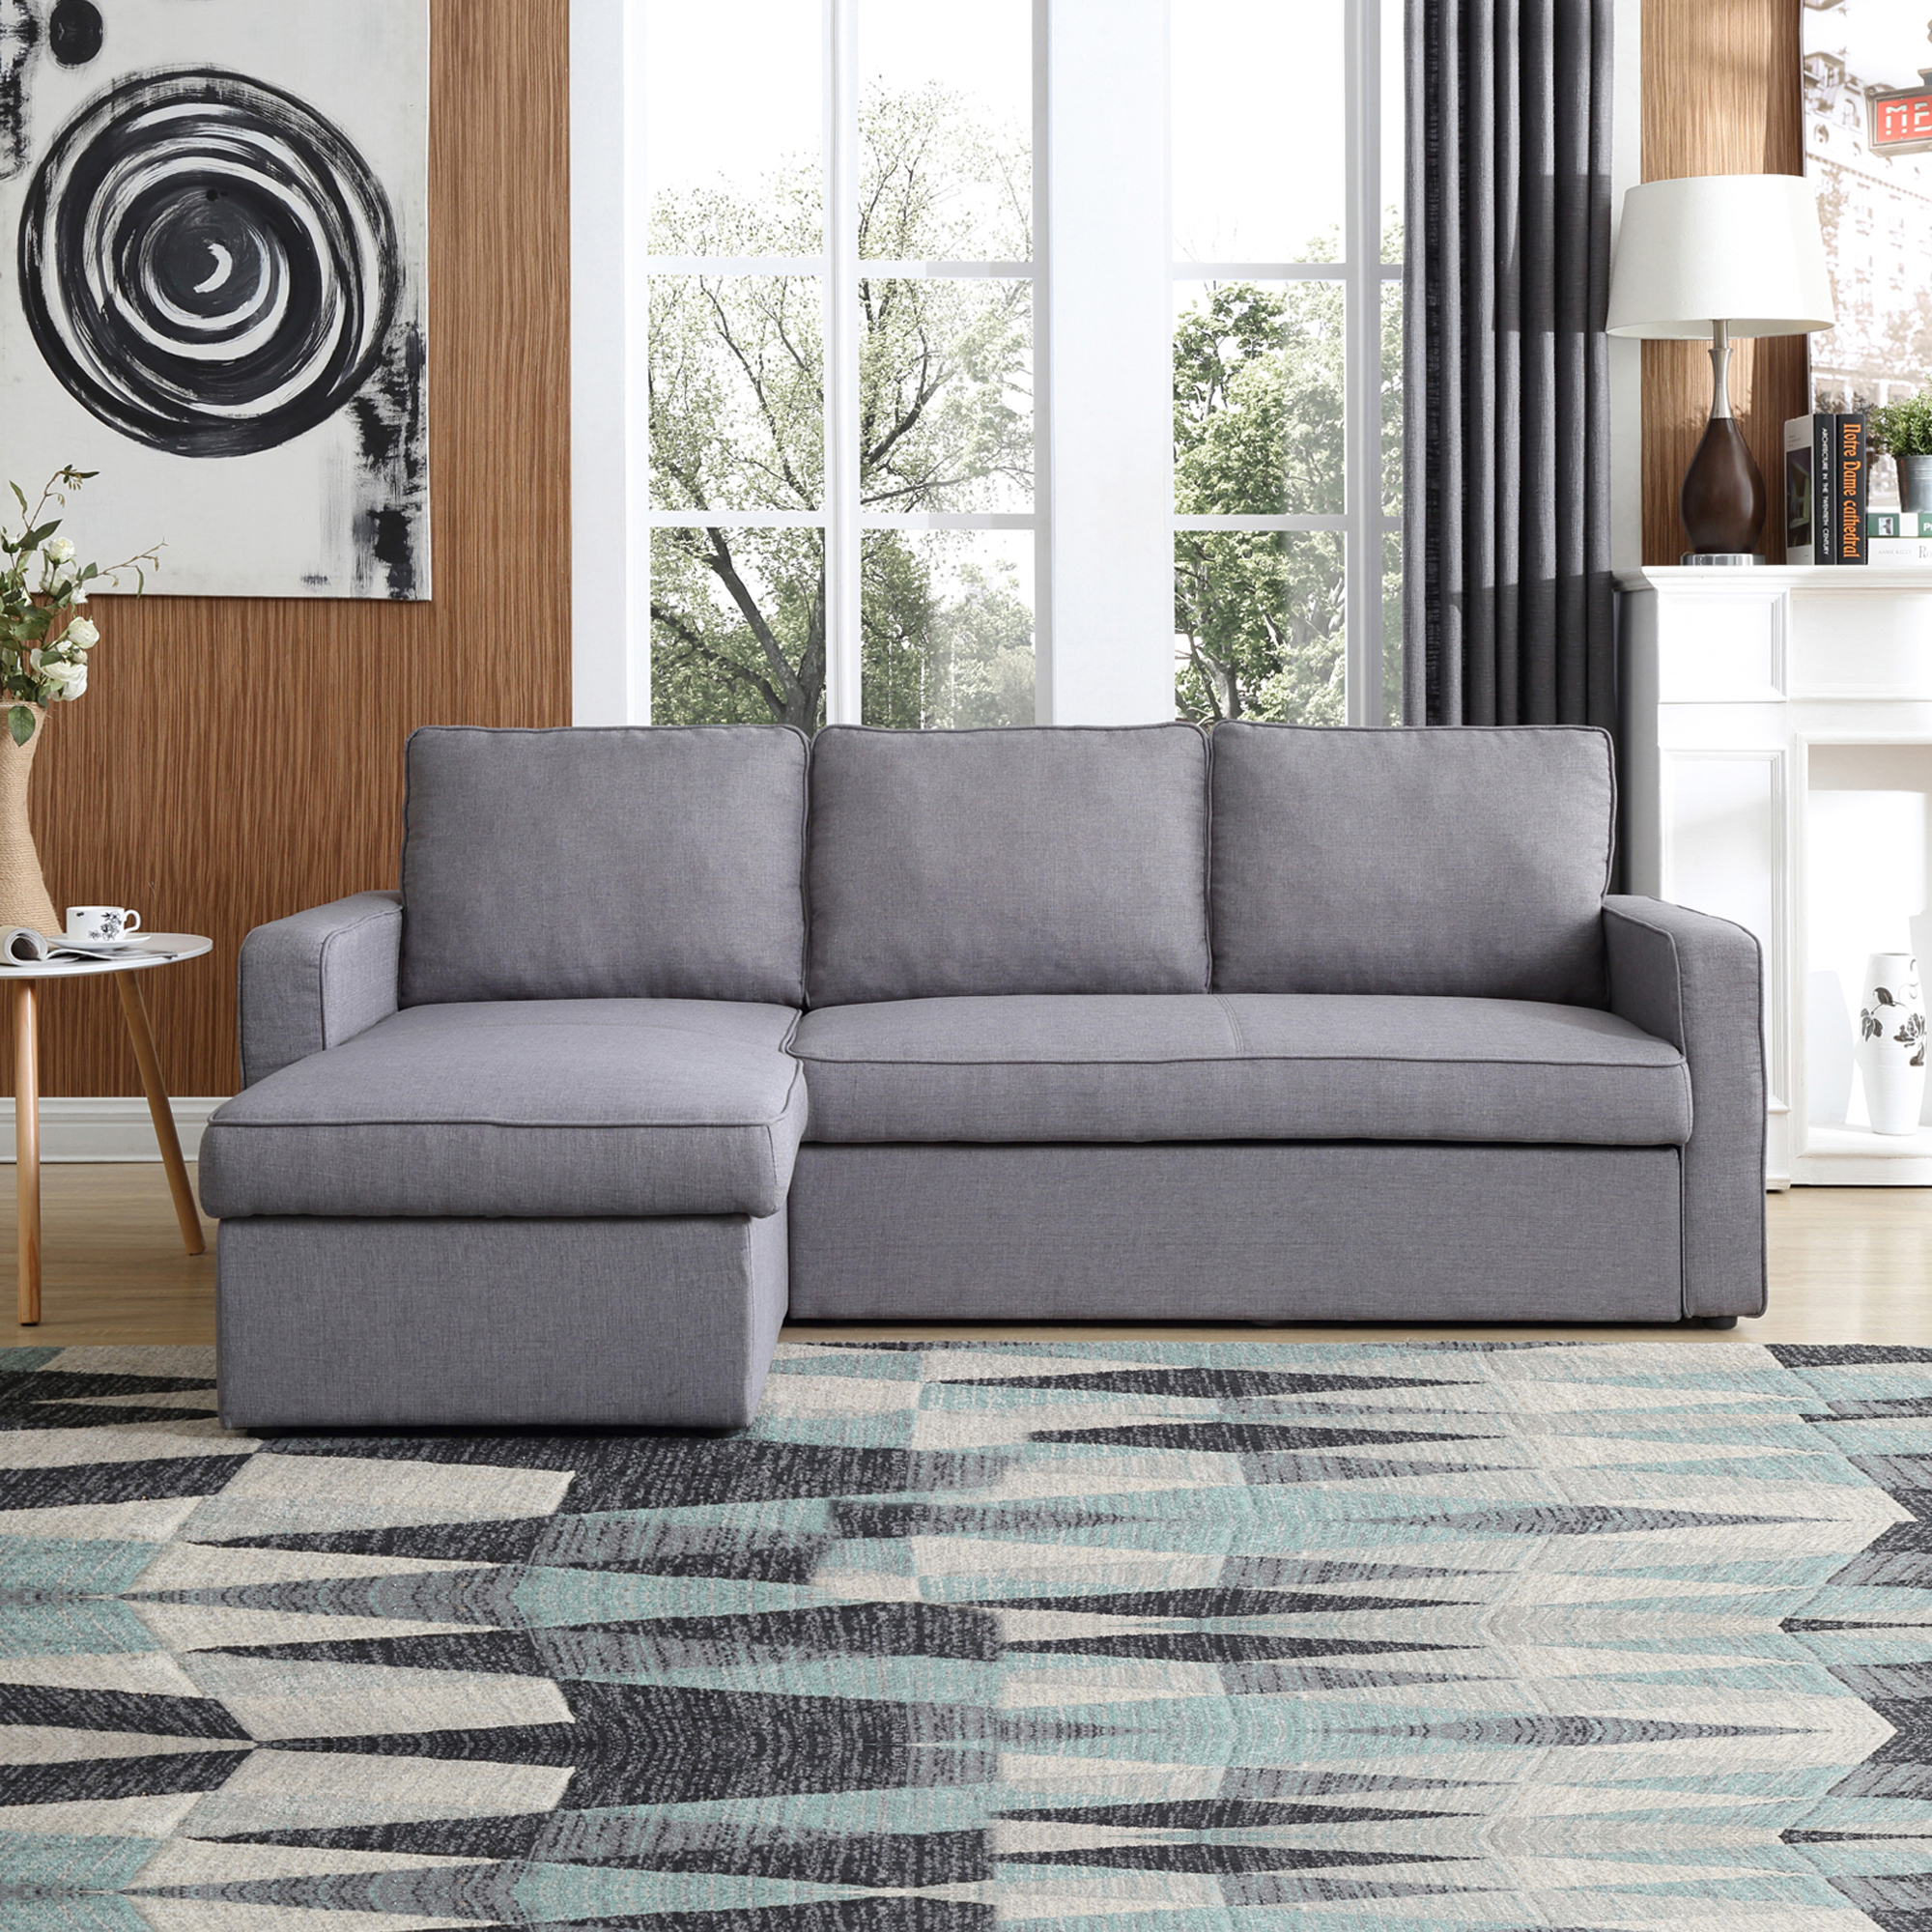 Grey Yarra 3 Seater Sofa Bed, What Is The Length Of A 3 Seater Sofa Bed